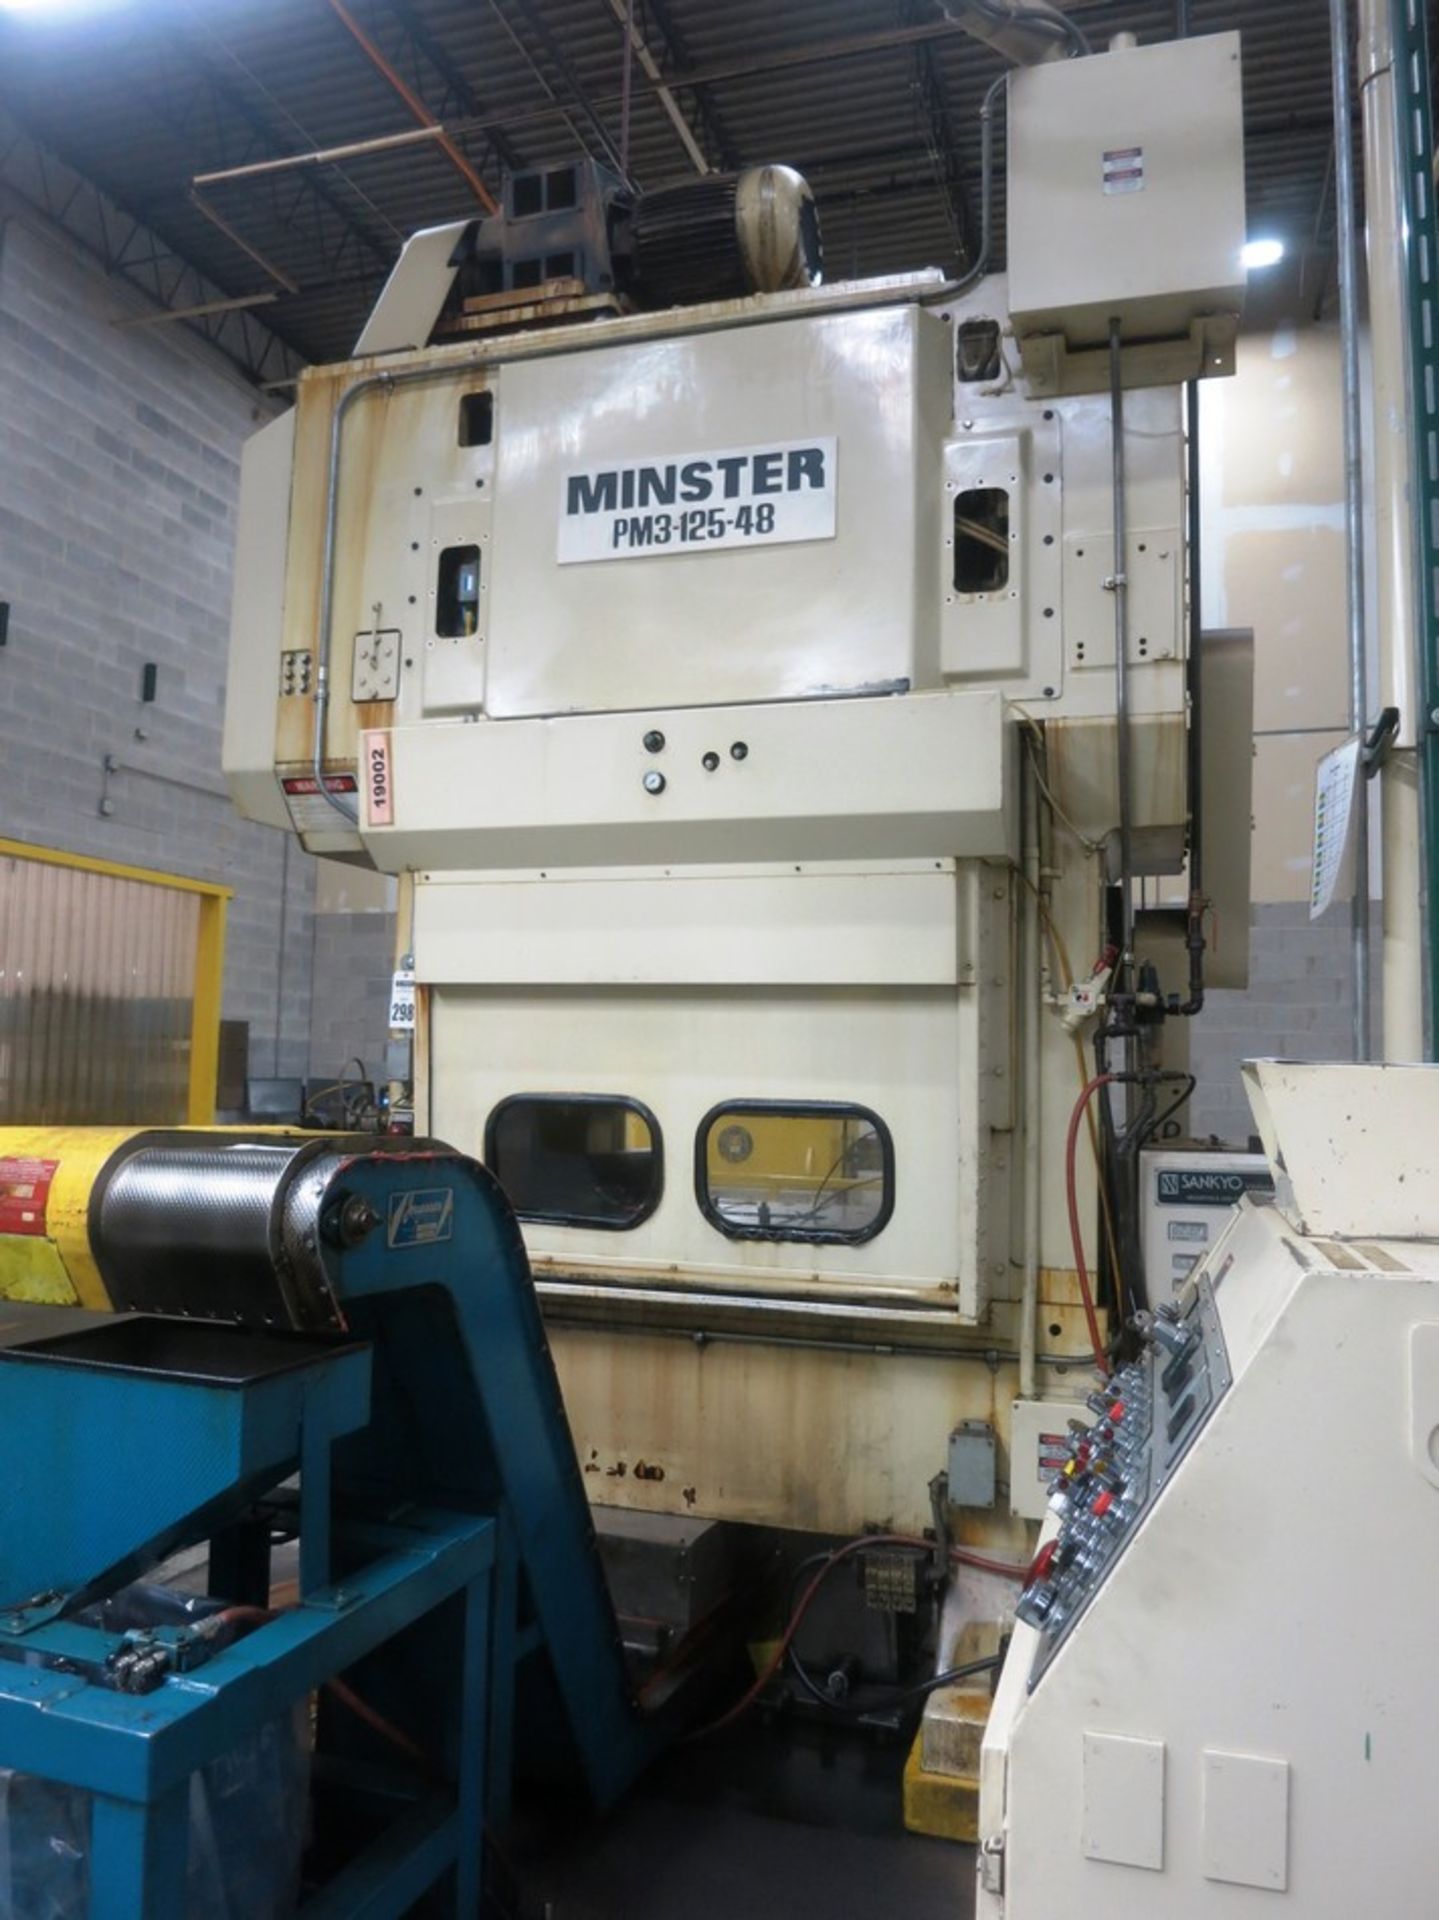 125 Ton Minster Mdl PM3-125-48 Piece-maker III Two Point, Progressive Die Press, S/N PM3-125- - Image 2 of 15